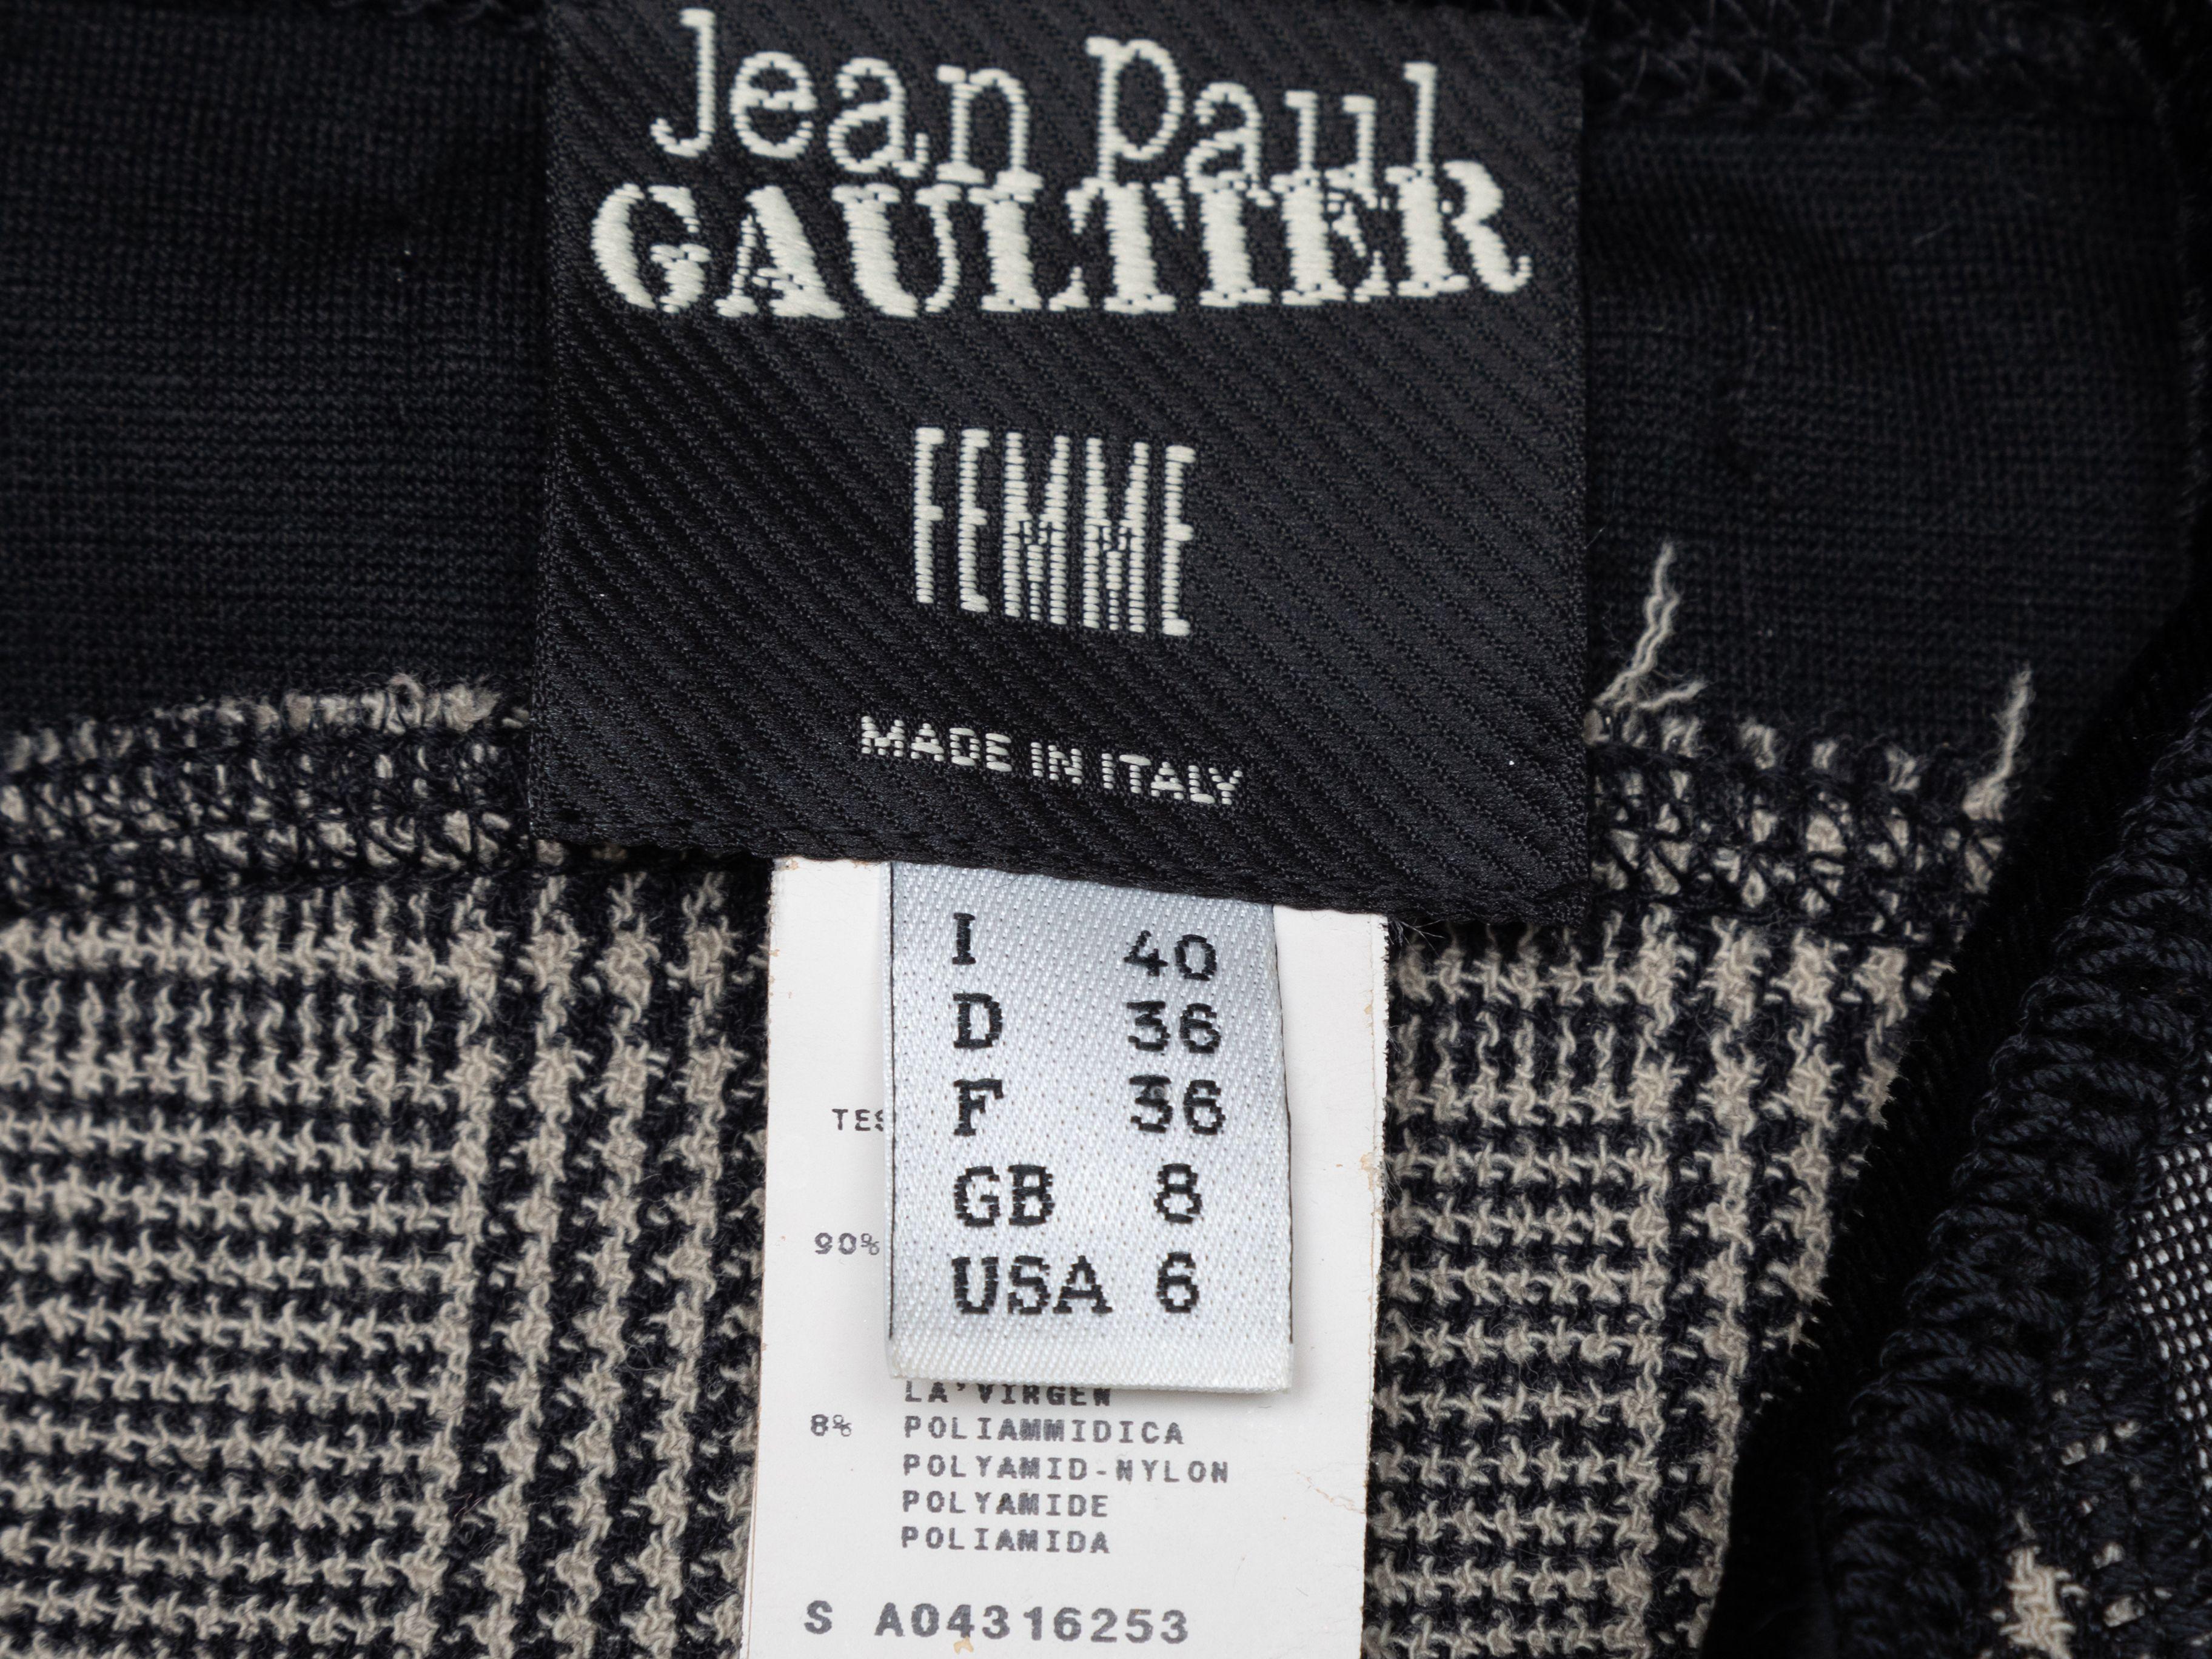 Product Details: Black and grey virgin wool houndstooth vest by Jean Paul Gaultier. Crew neck. Belt at waist. Zip closure at center front. 28